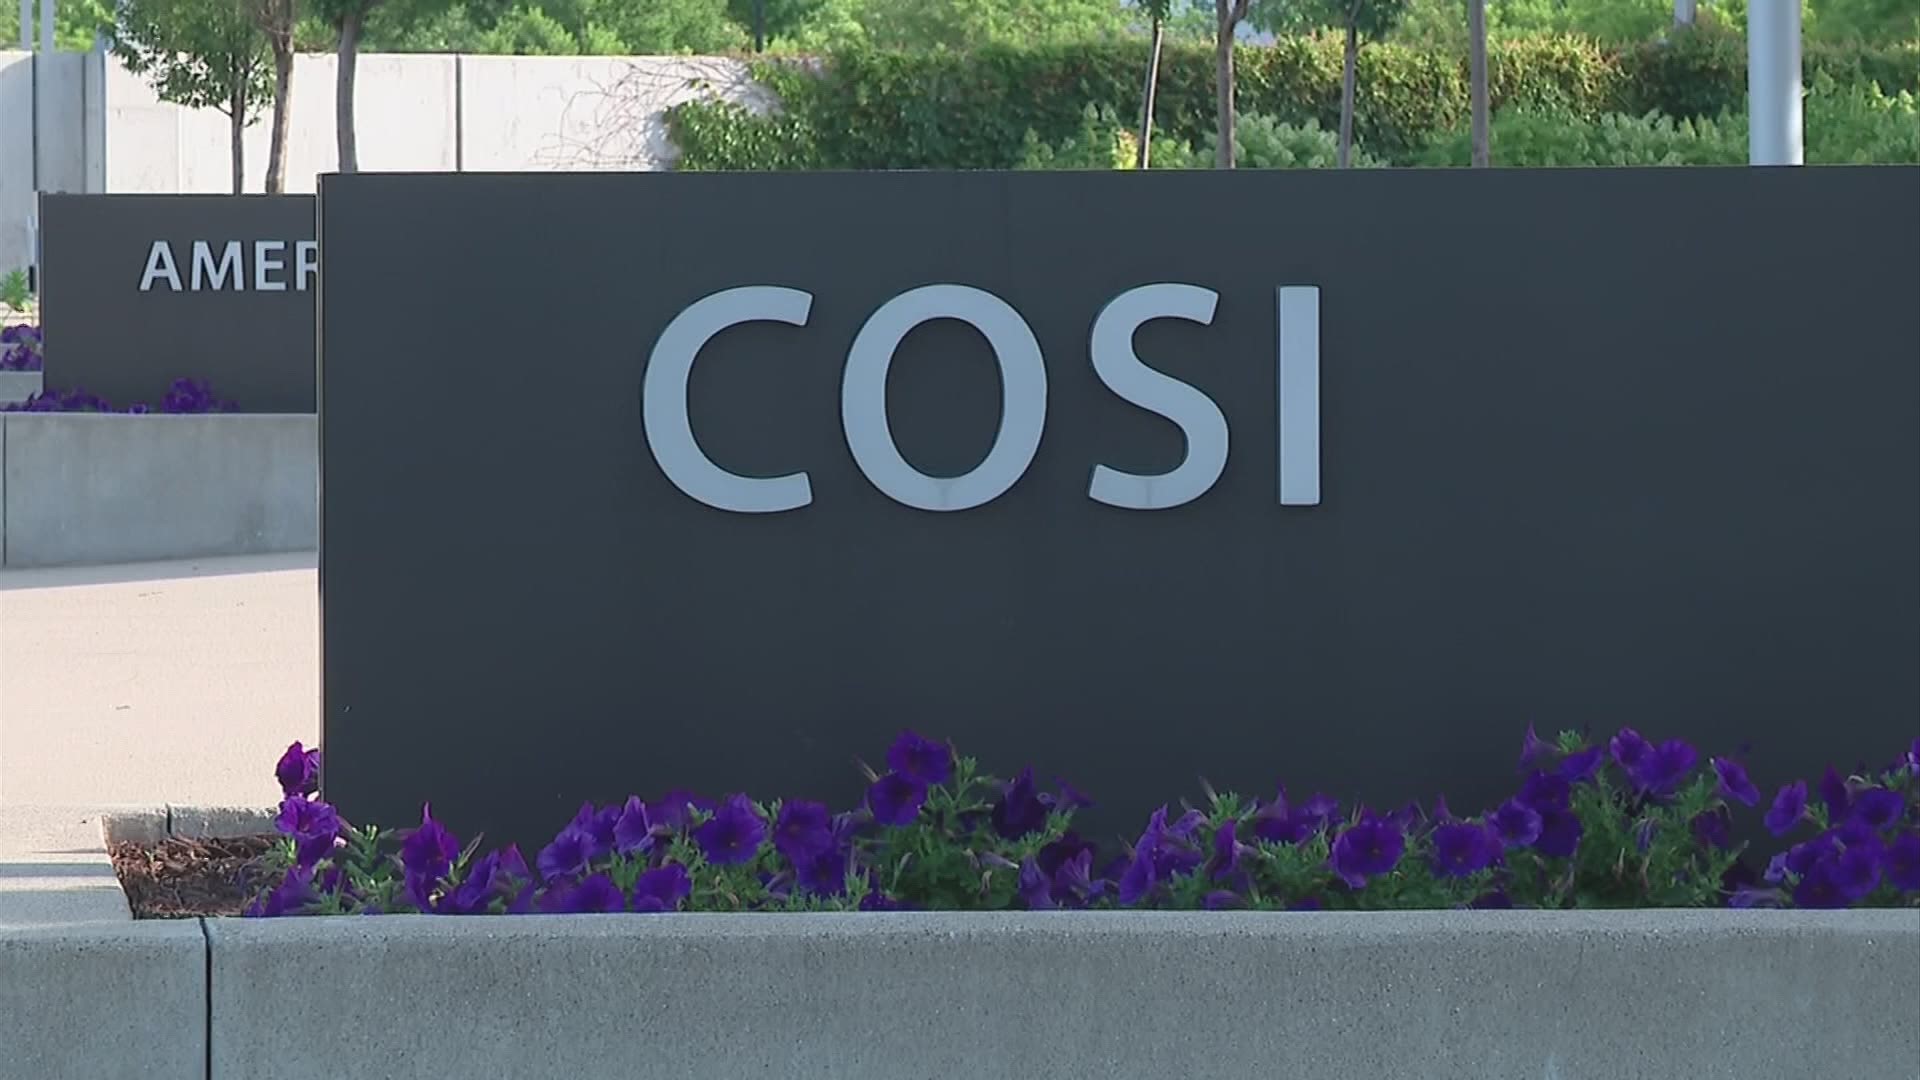 COSI will remained closed during the Level Three pandemic.